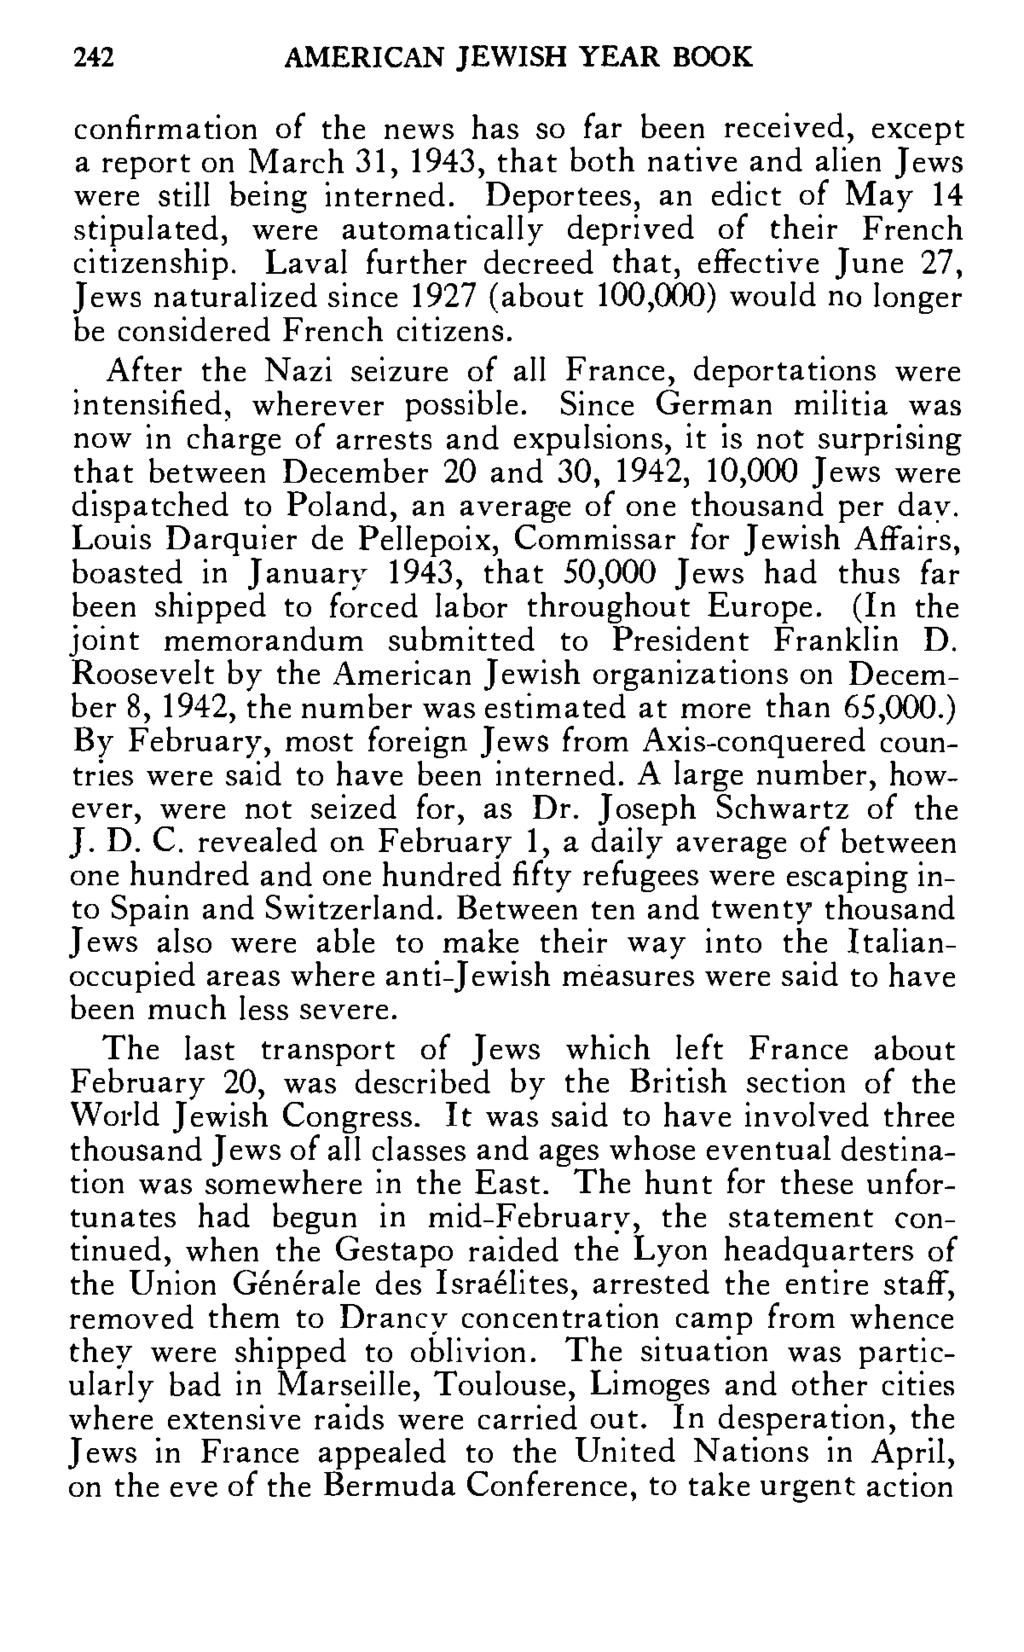 242 AMERICAN JEWISH YEAR BOOK confirmation of the news has so far been received, except a report on March 31, 1943, that both native and alien Jews were still being interned.